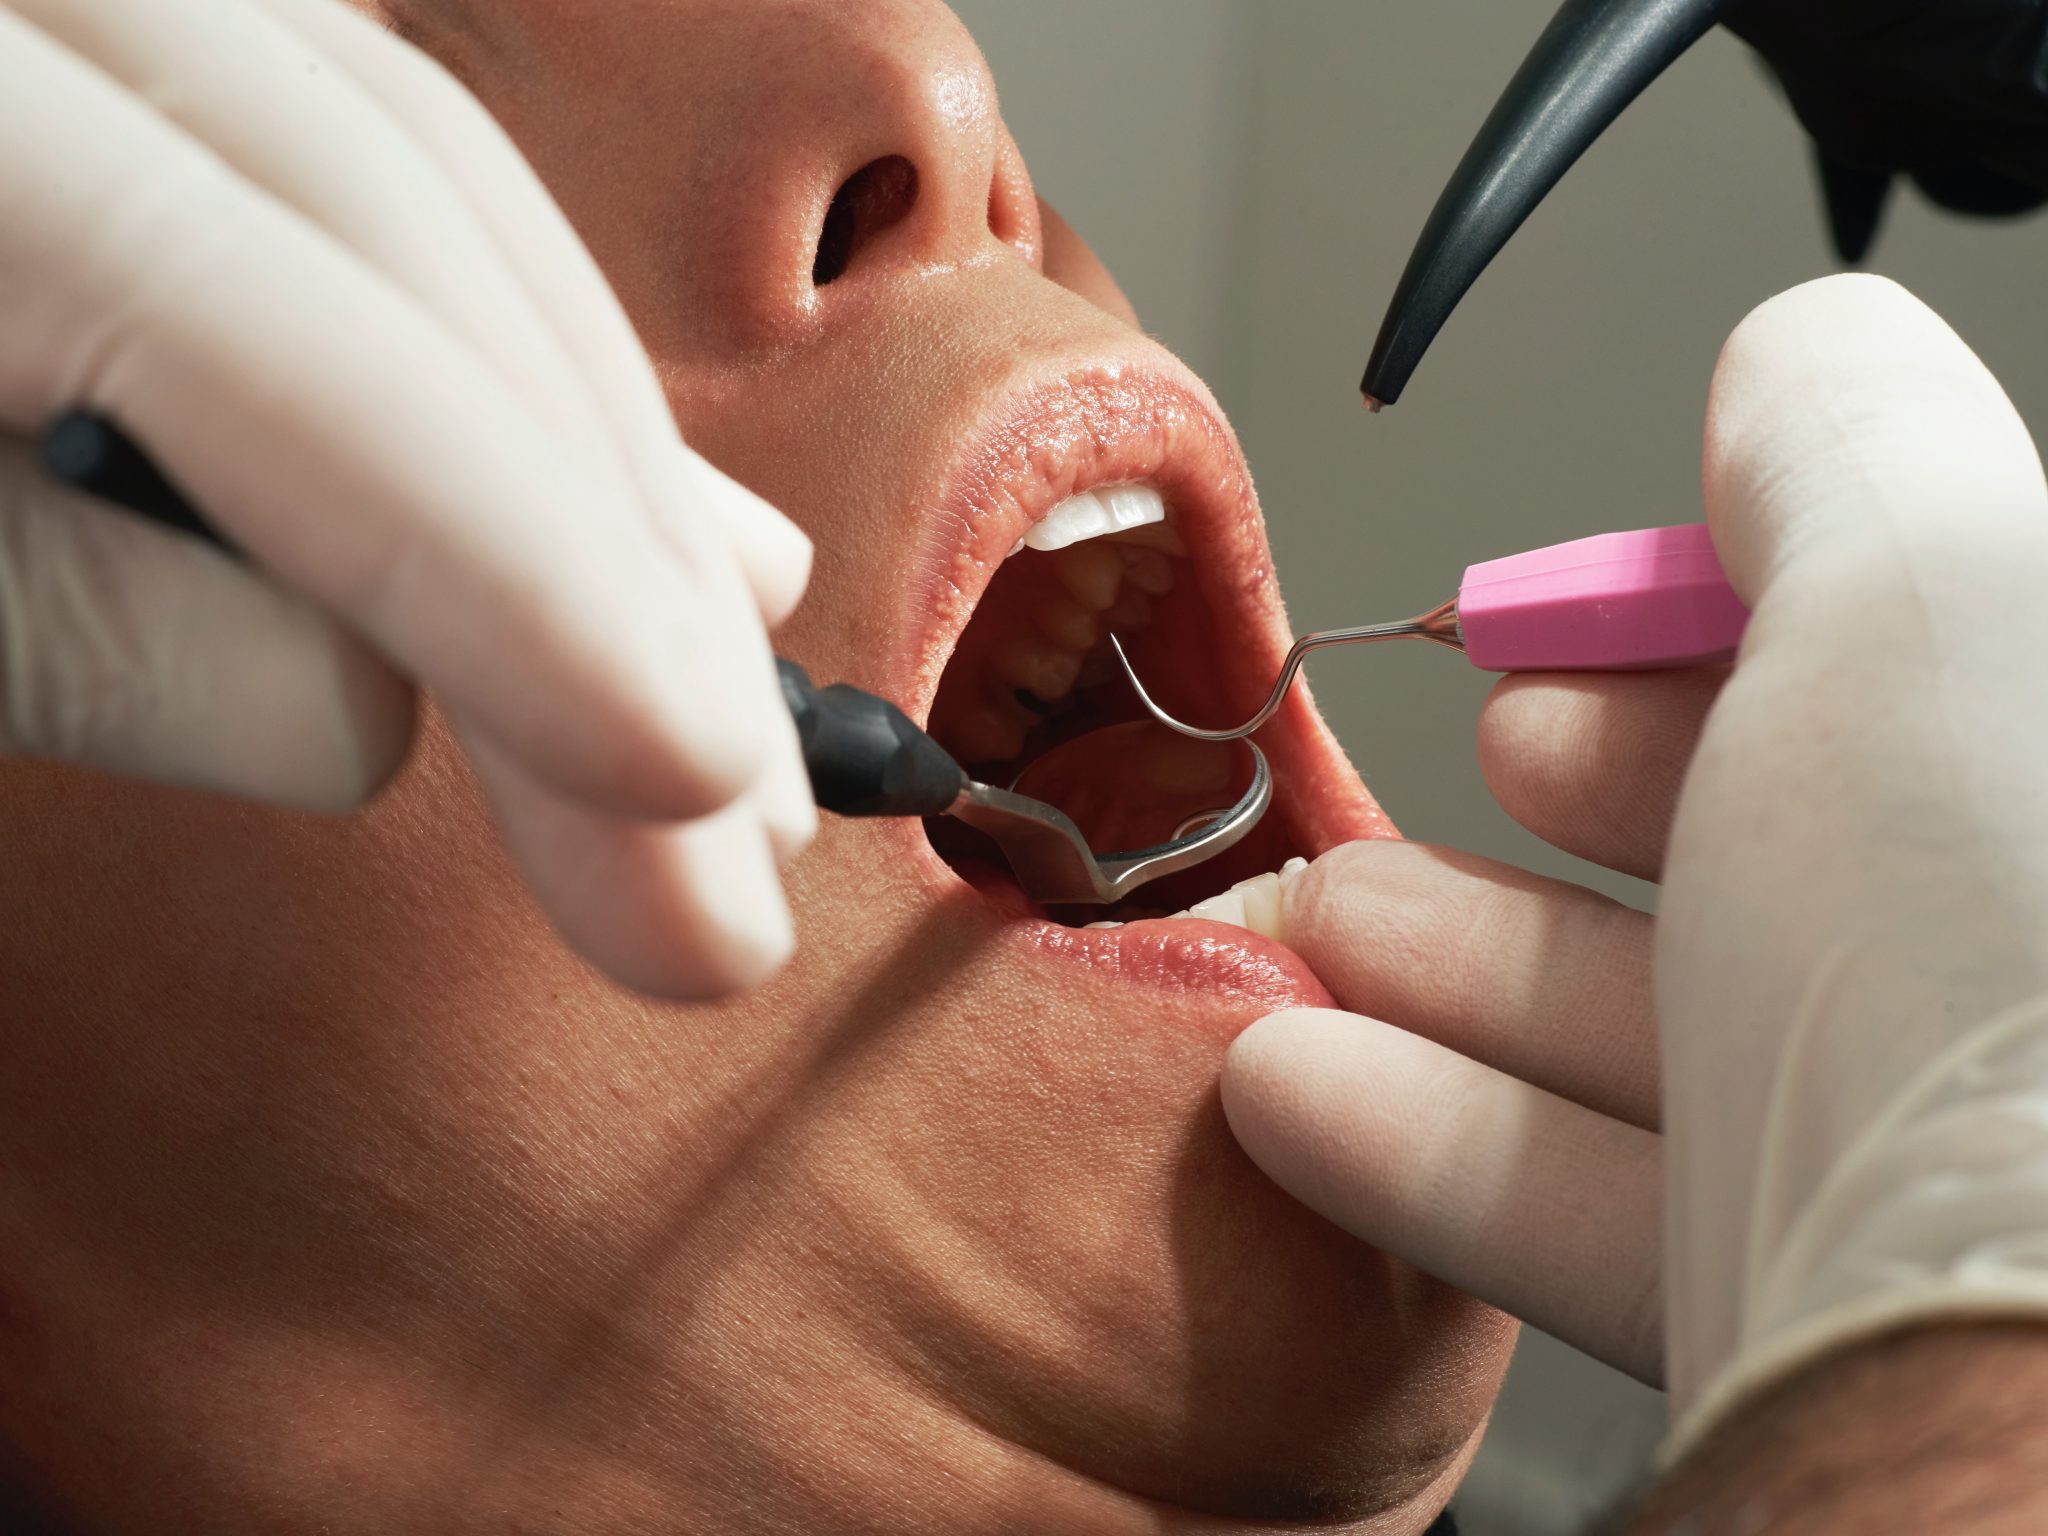 Dental charity urges the government to increase funding to tackle backlogs